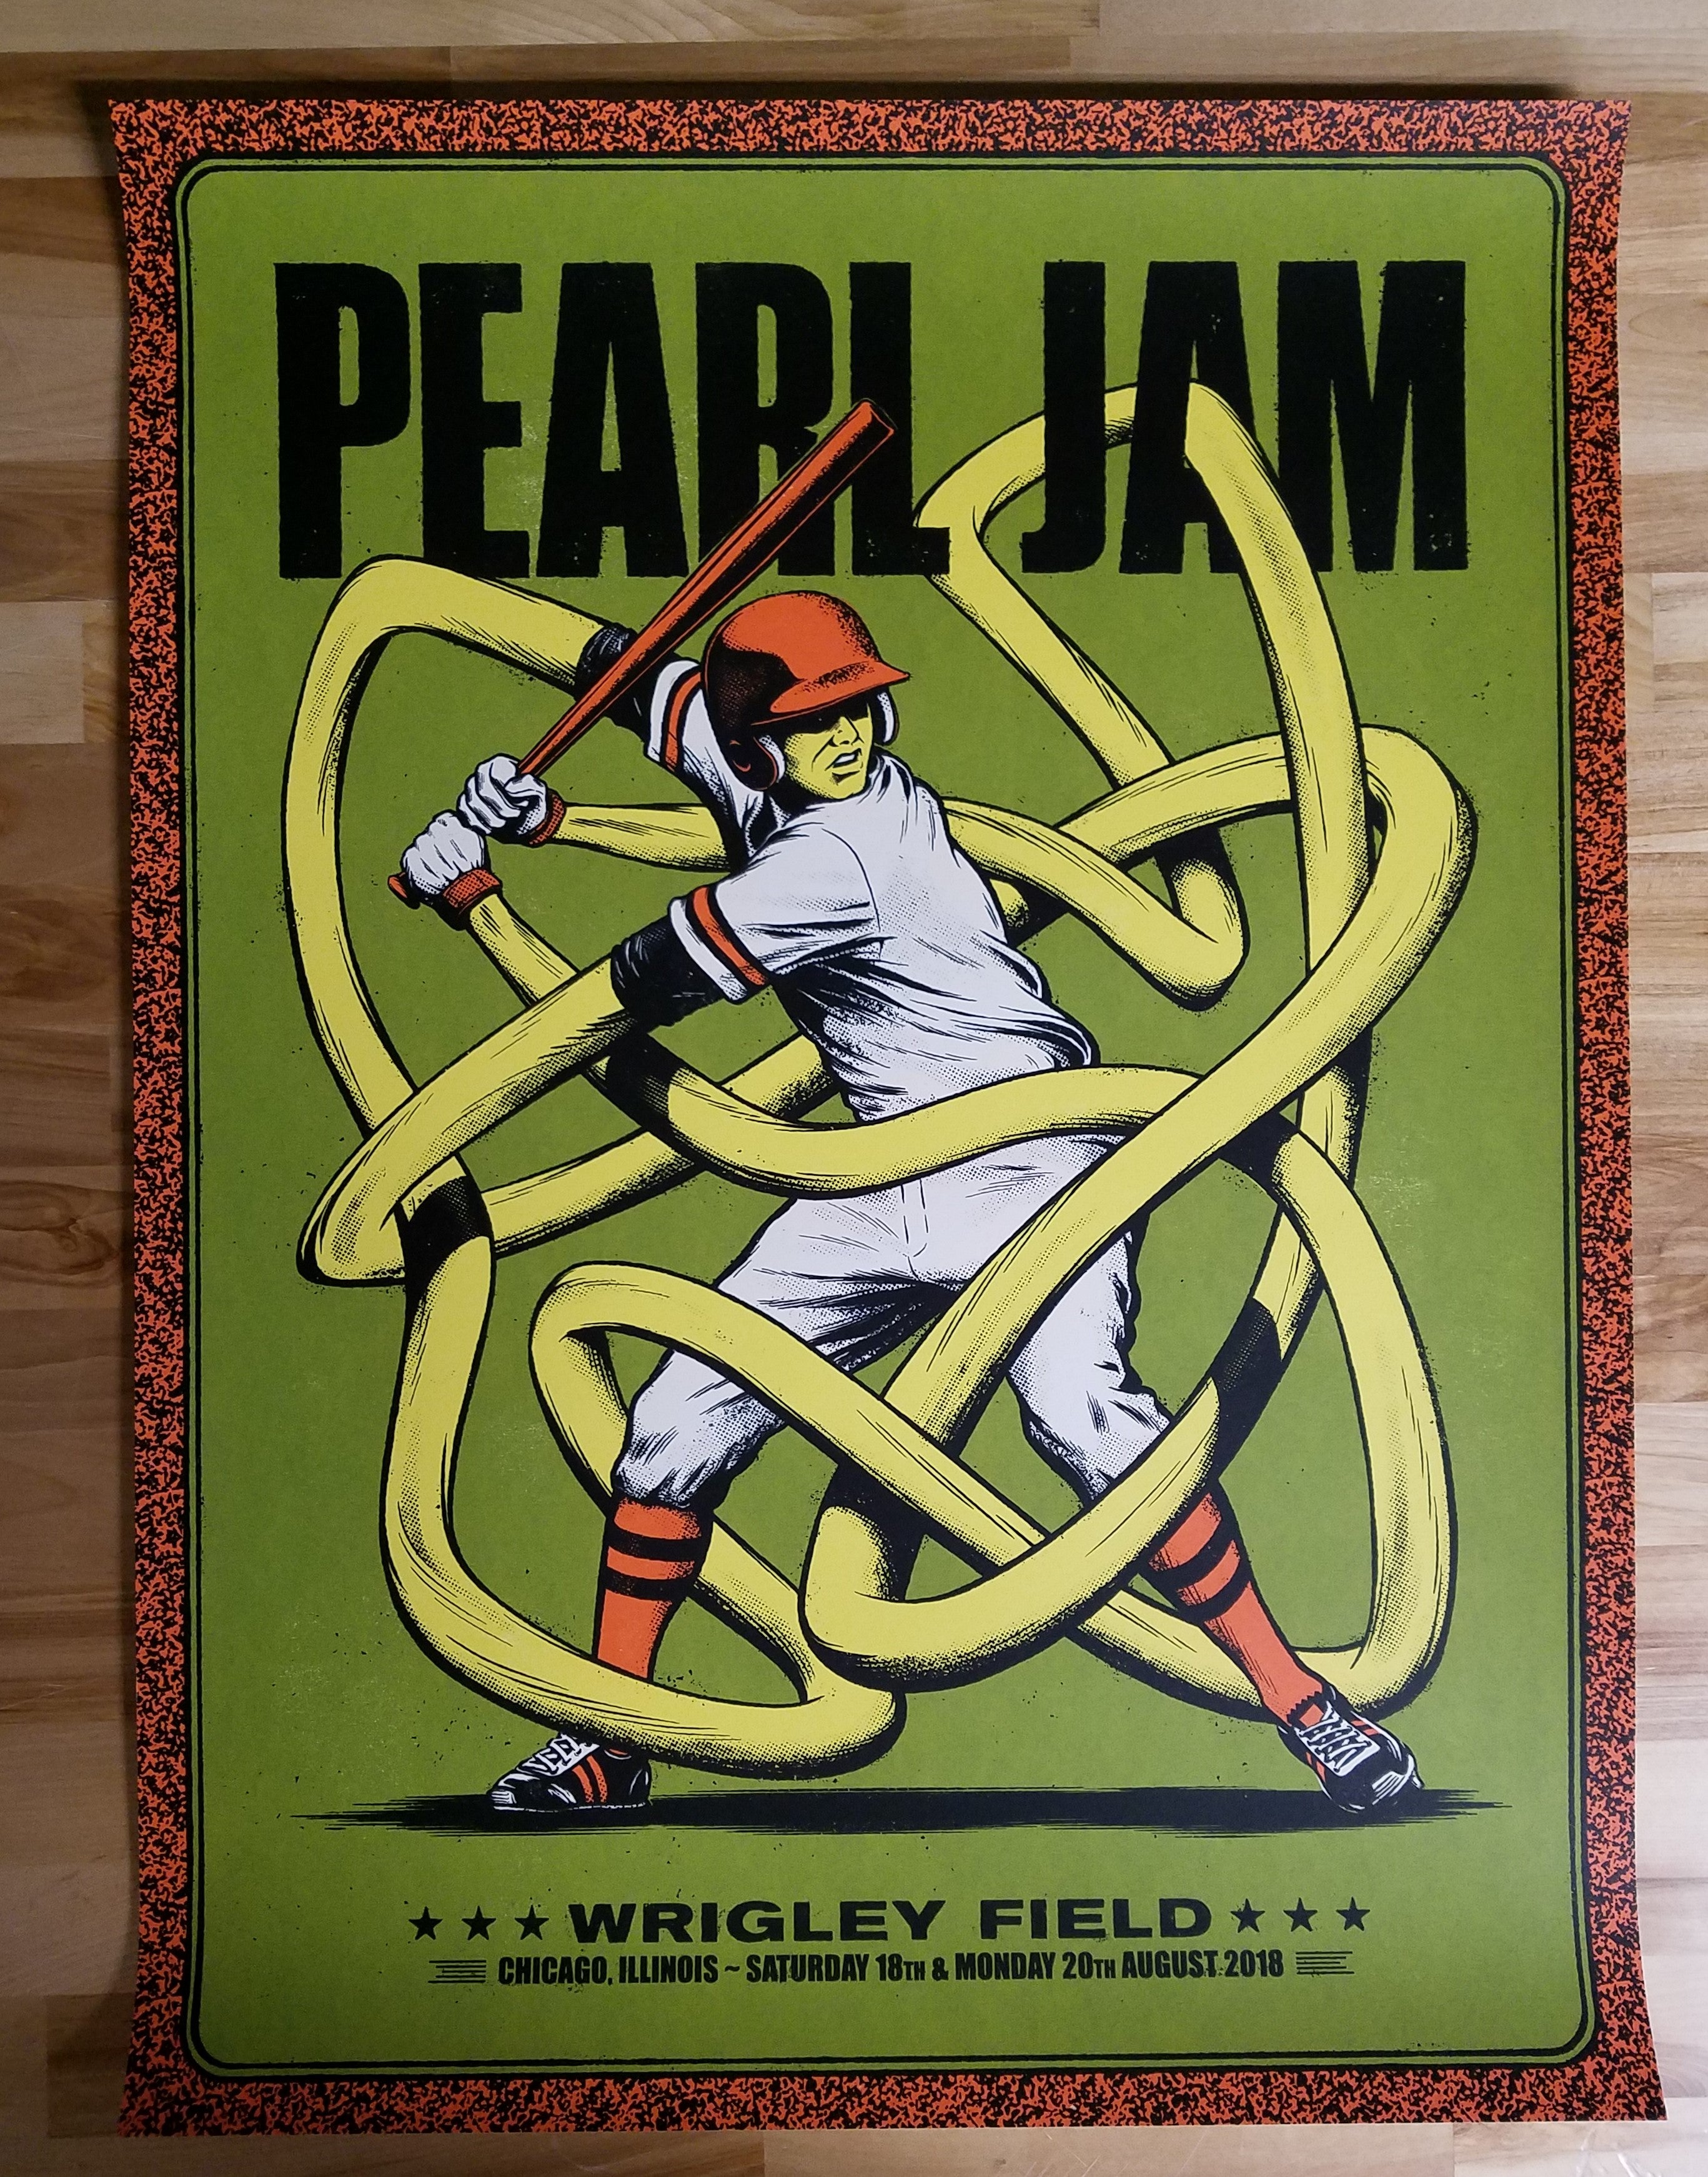 Title:  Pearl Jam Ames Bros Wrigley Field (August 18th and 20th, 2018)  Artist:  Andrew Fairclough  Edition:  Official Merch Tent Poster, unsigned and unnumbered  Type:  Screen print poster  Size:  18" x 24"   Location: Chicago, IL  Venue: Wrigley Field  Notes:   Released on August 16, 2018 at the Wrigley Field Merch Tent across the street from the field.  Check out our other listings for more hard to find and out of print posters.